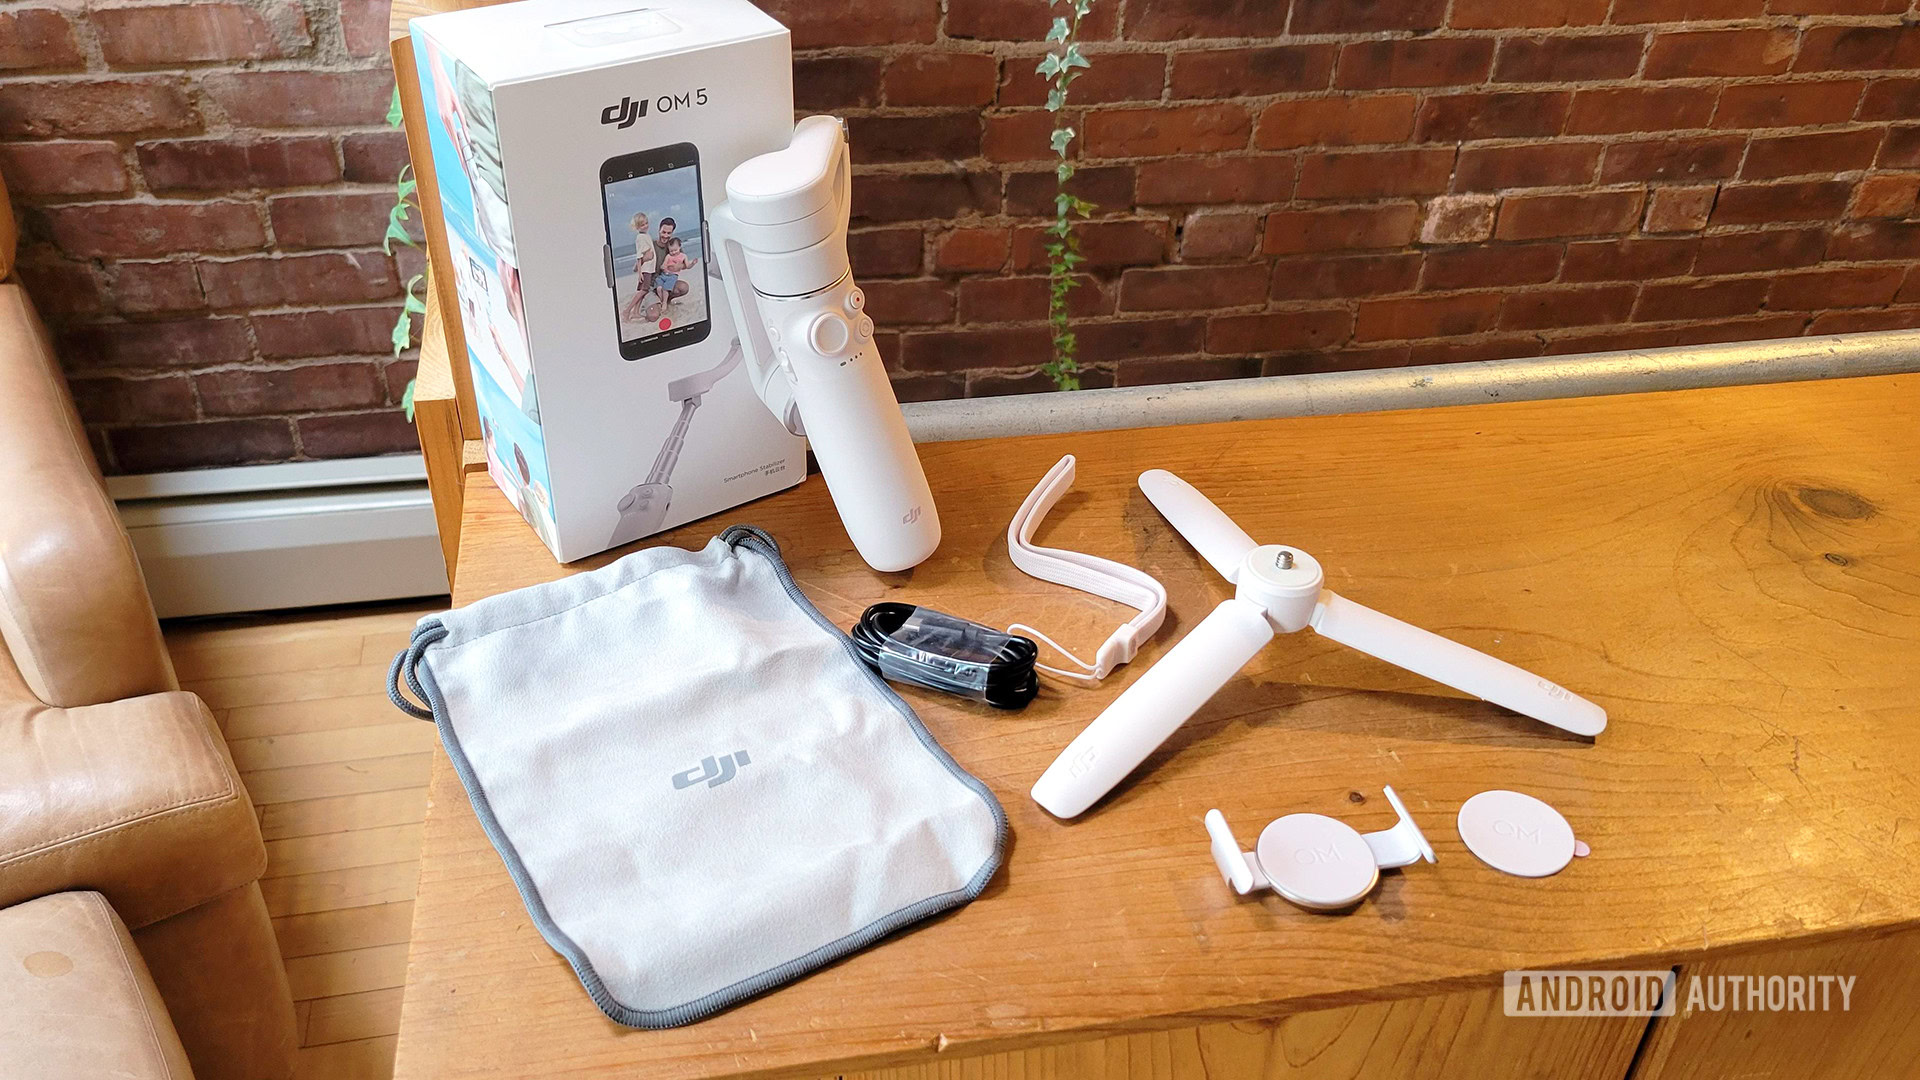 Dji om 5 review retail box contents